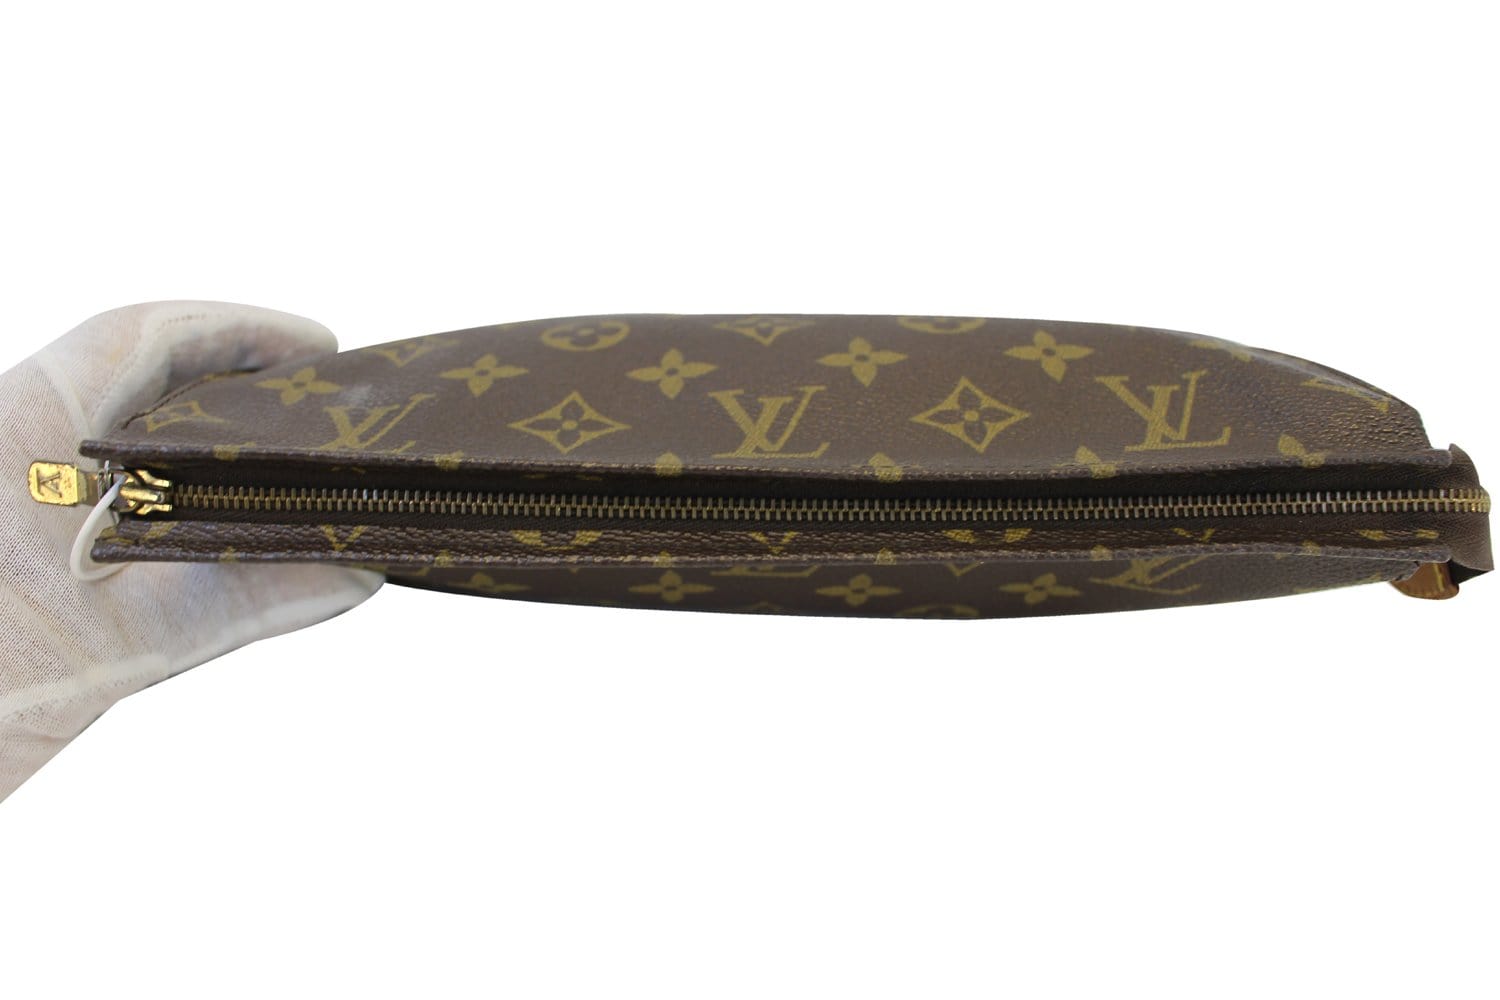 Find us on FB ☎️03 9826 0136 on Instagram: Louis Vuitton Poche Toilette 26  in Monogram Canvas with Washable Lining